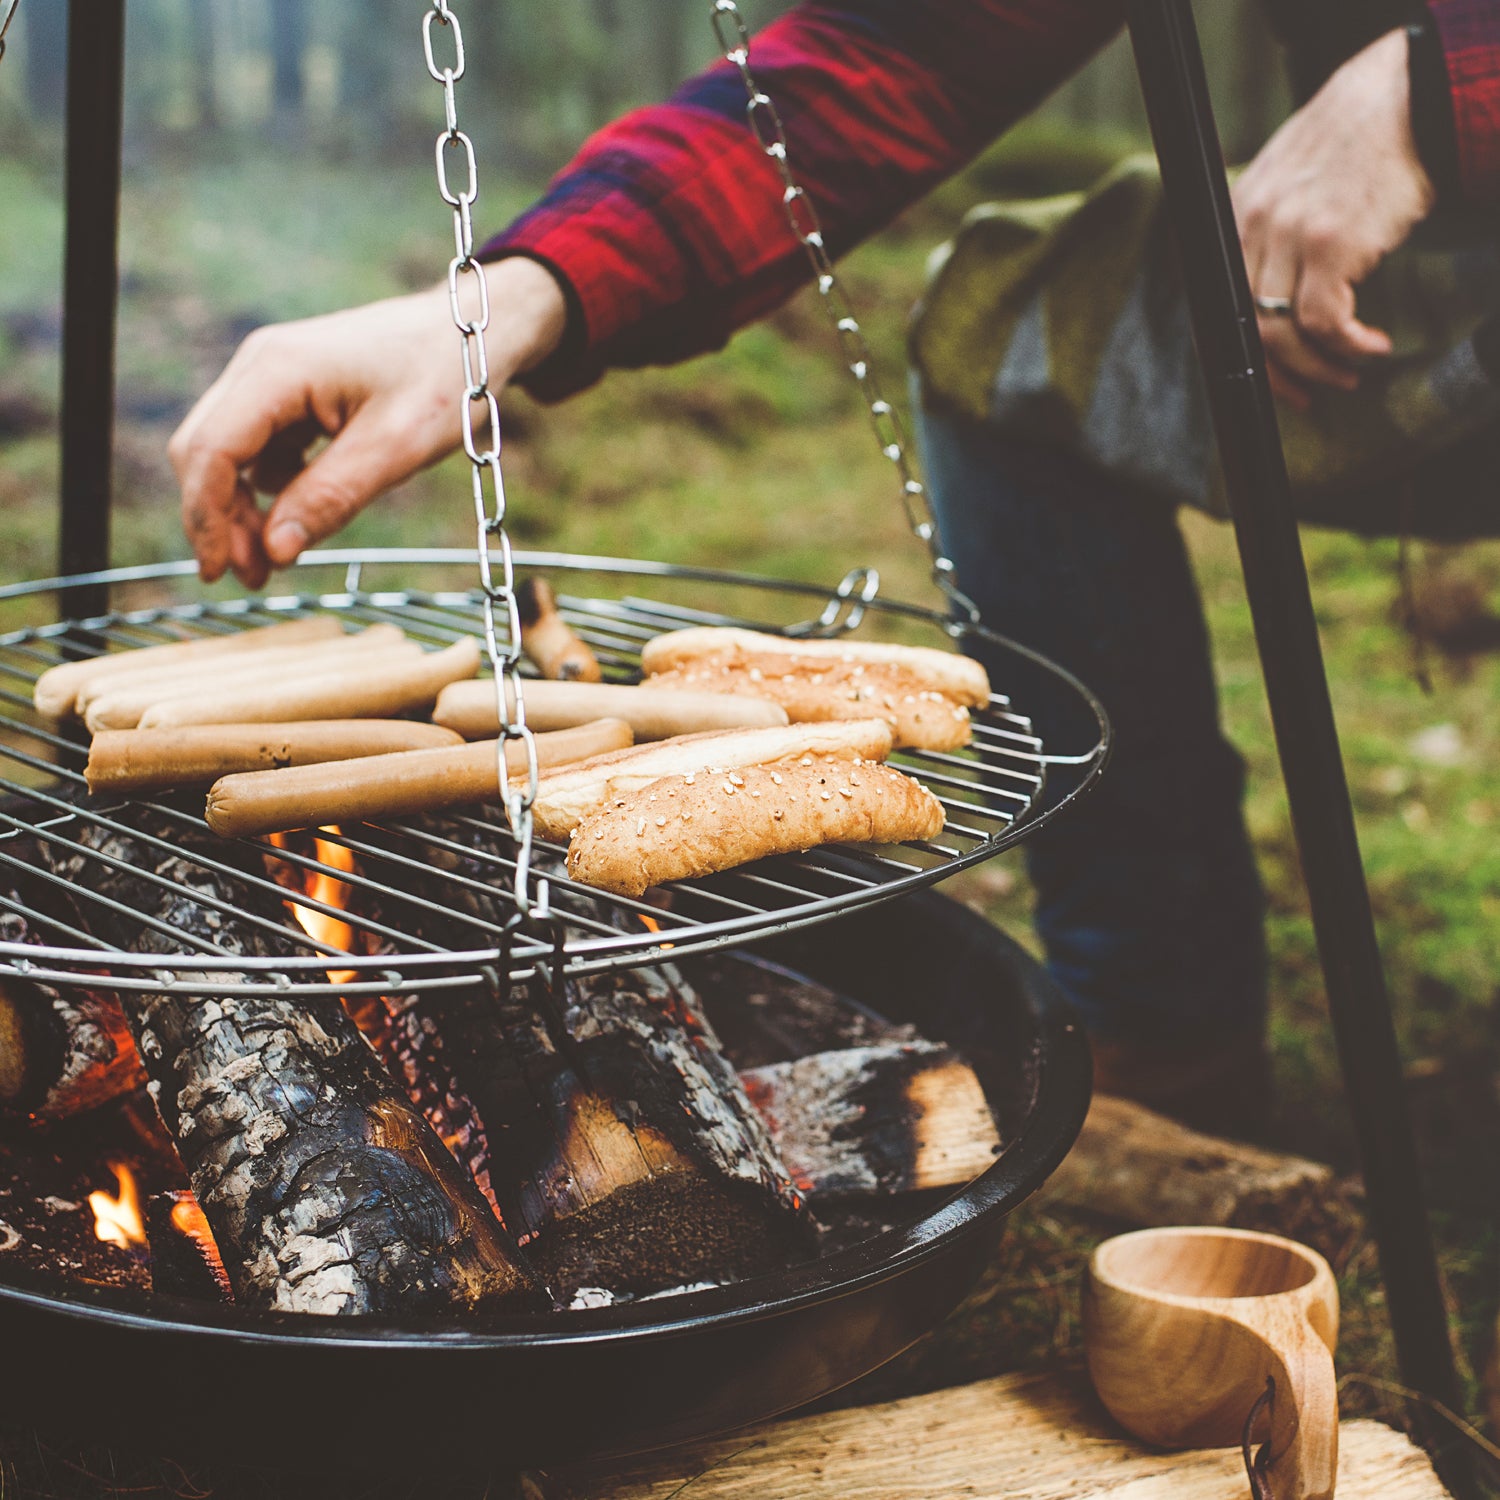 Camping Food Storage: How to Keep Your Food Safe in the Wild